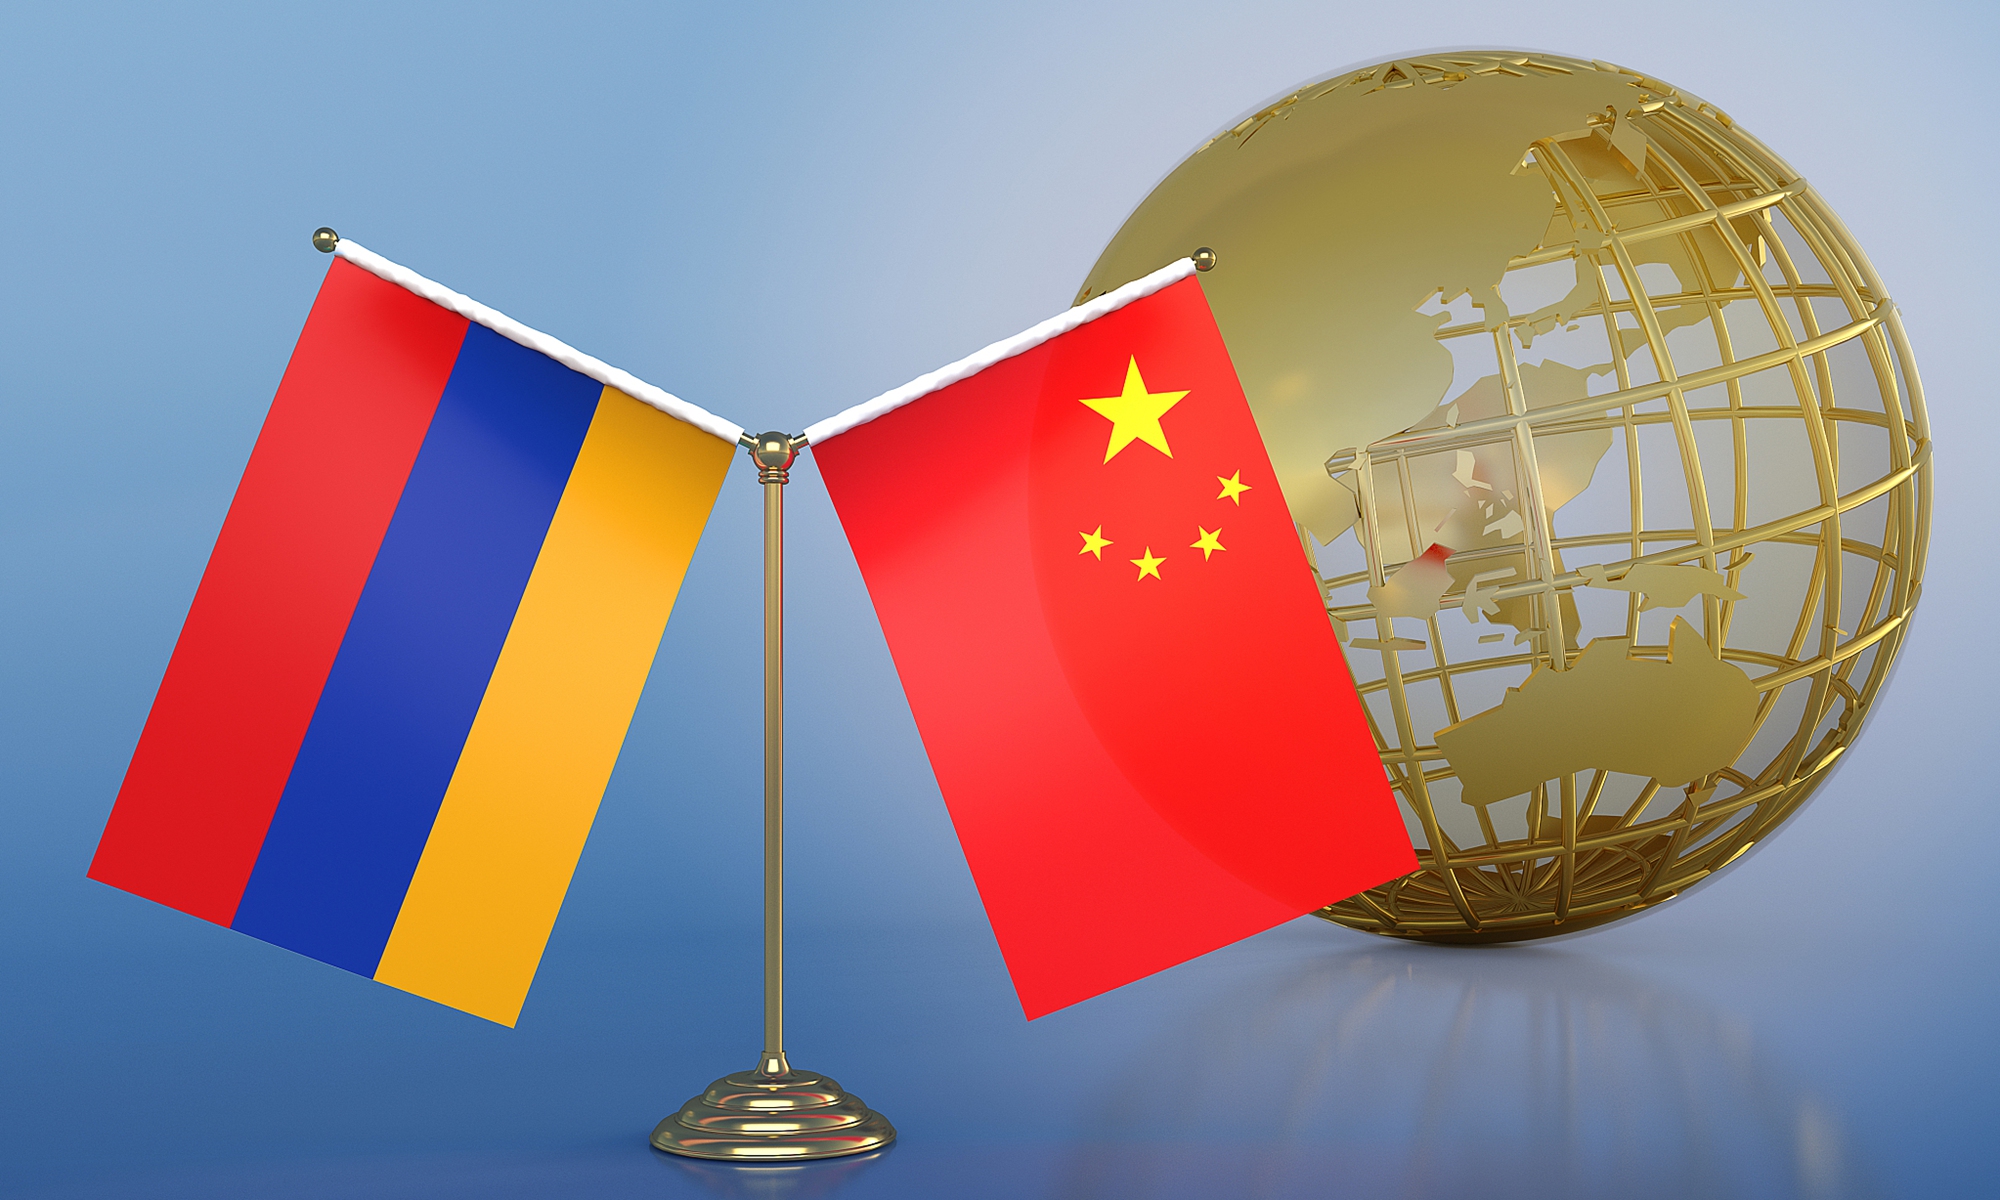 Armenia should deepen friendly exchanges with China, learn from Chinese modernization experience